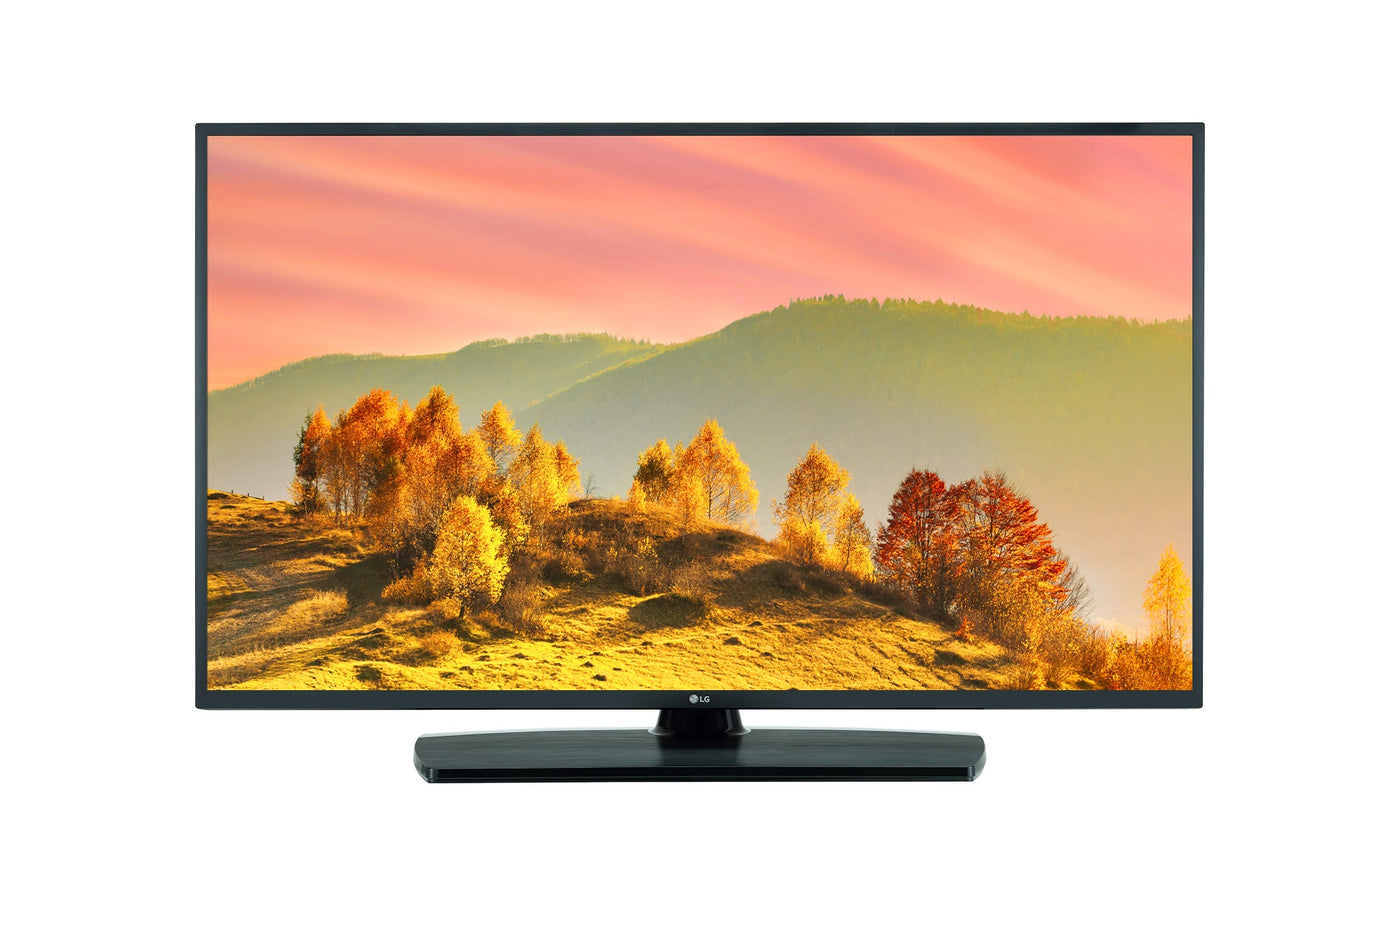 LG 50UN570H 50" 4K UHD Hospitality TV with Pro:Idiom, b-LAN and 2 Year Warranty